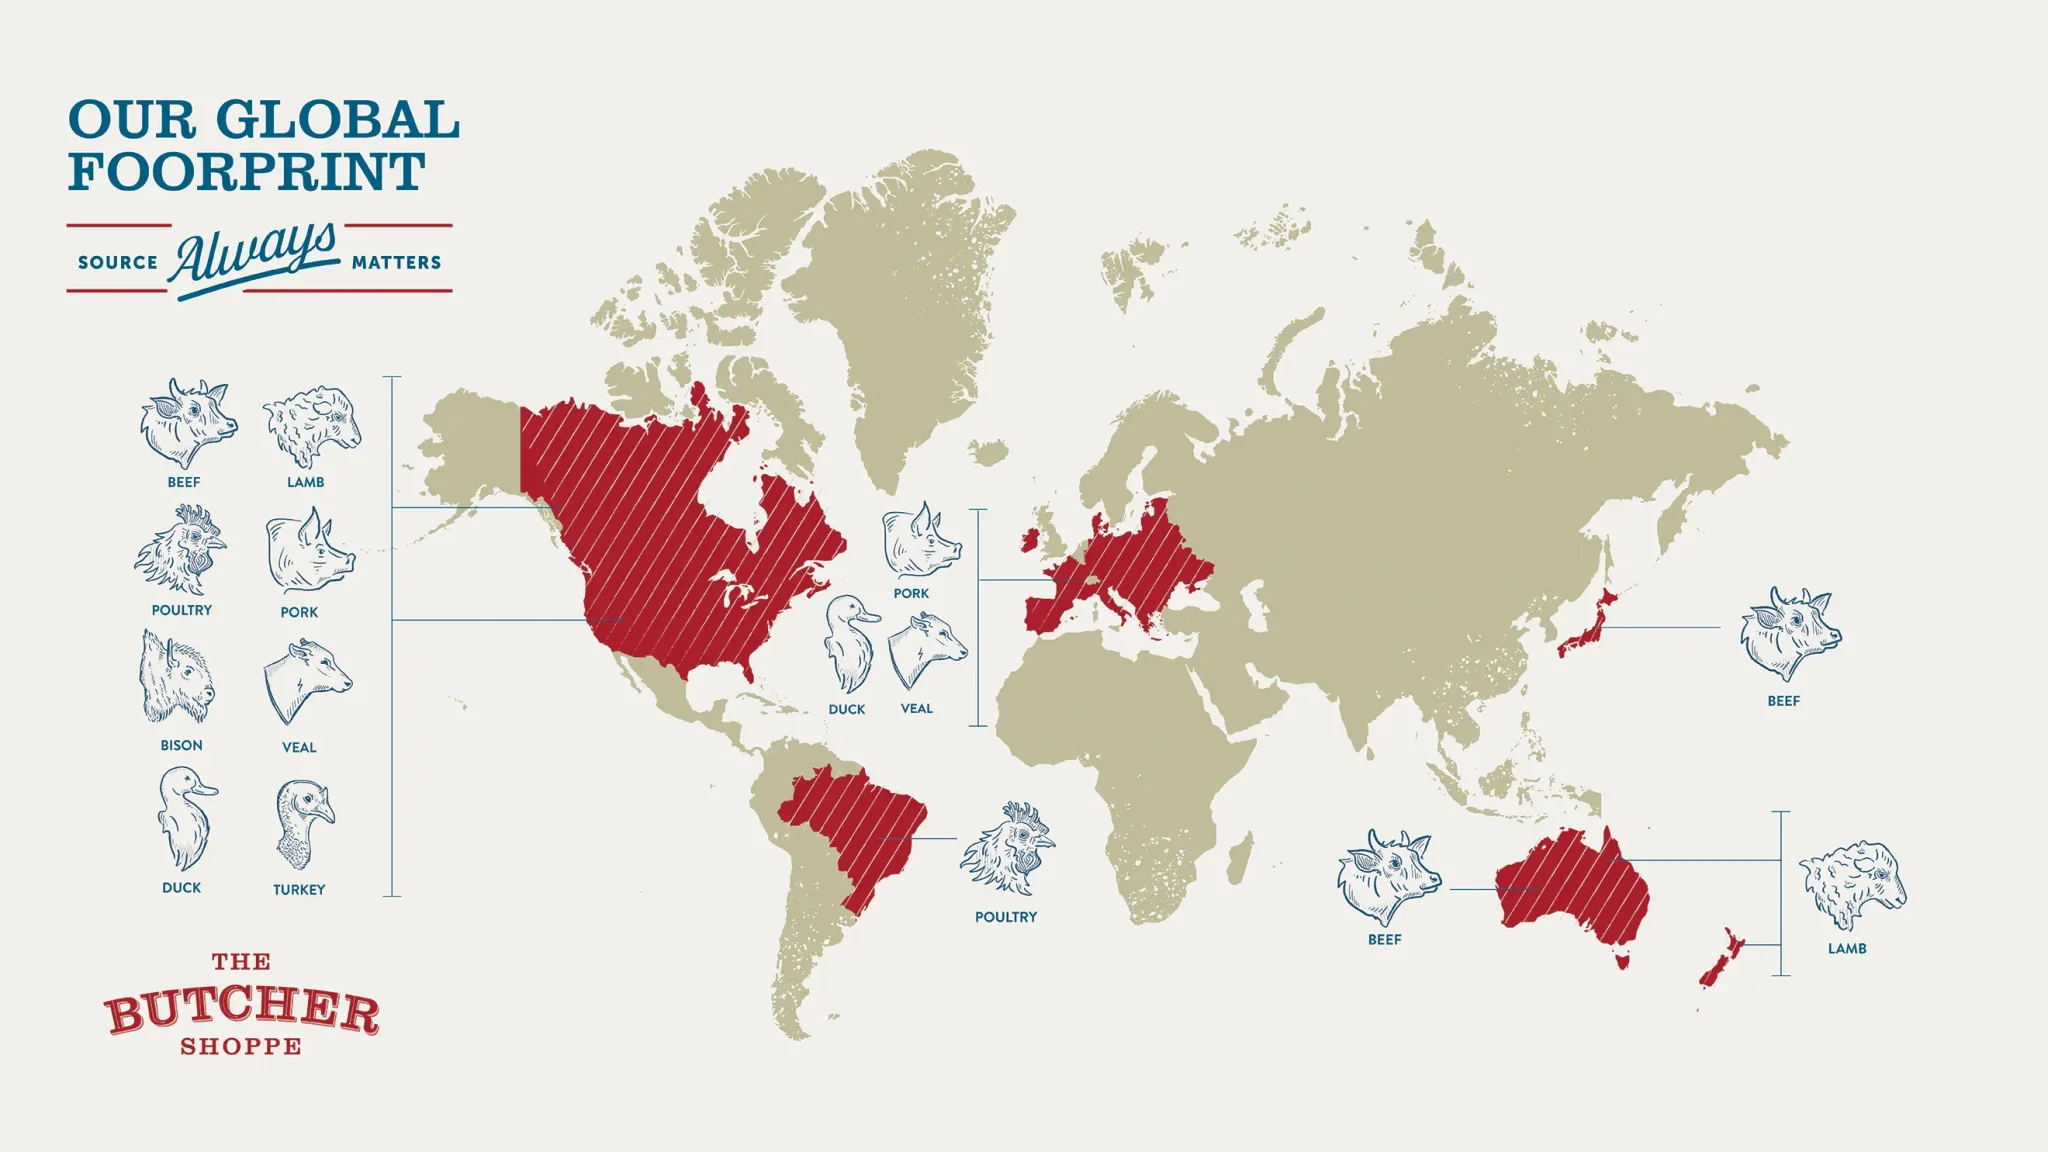 Global map highlighting the areas that The Butcher Shoppe sources it's products from